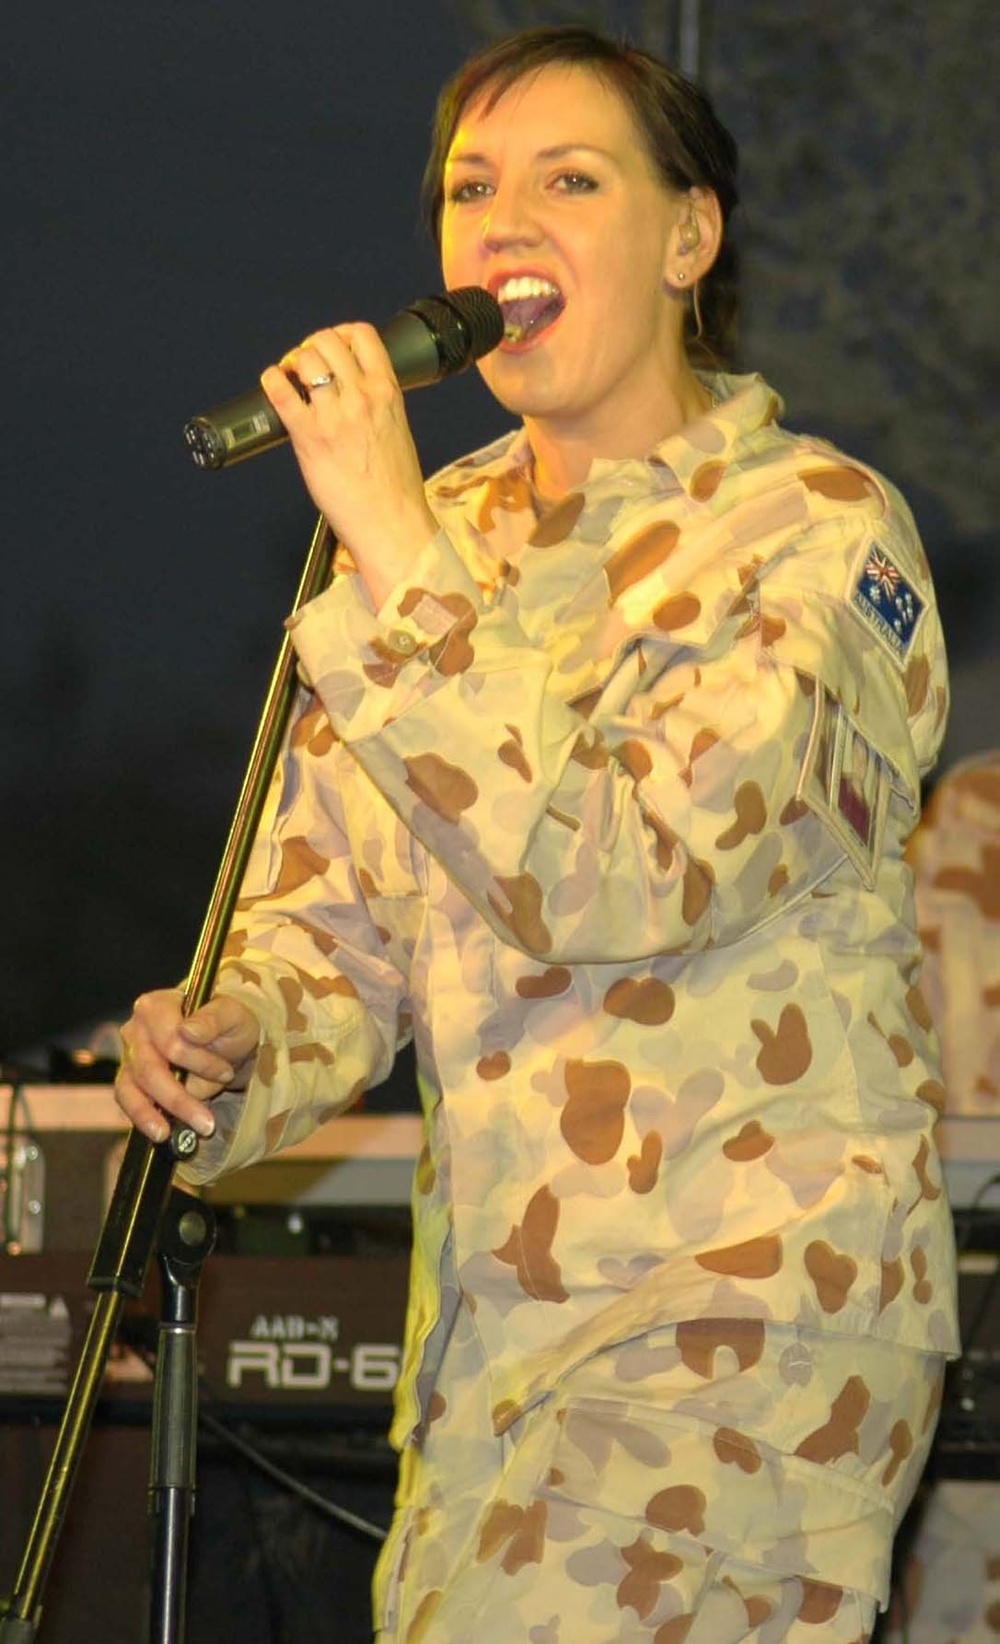 Lead singer Deb Cotton from the Australian Army Band